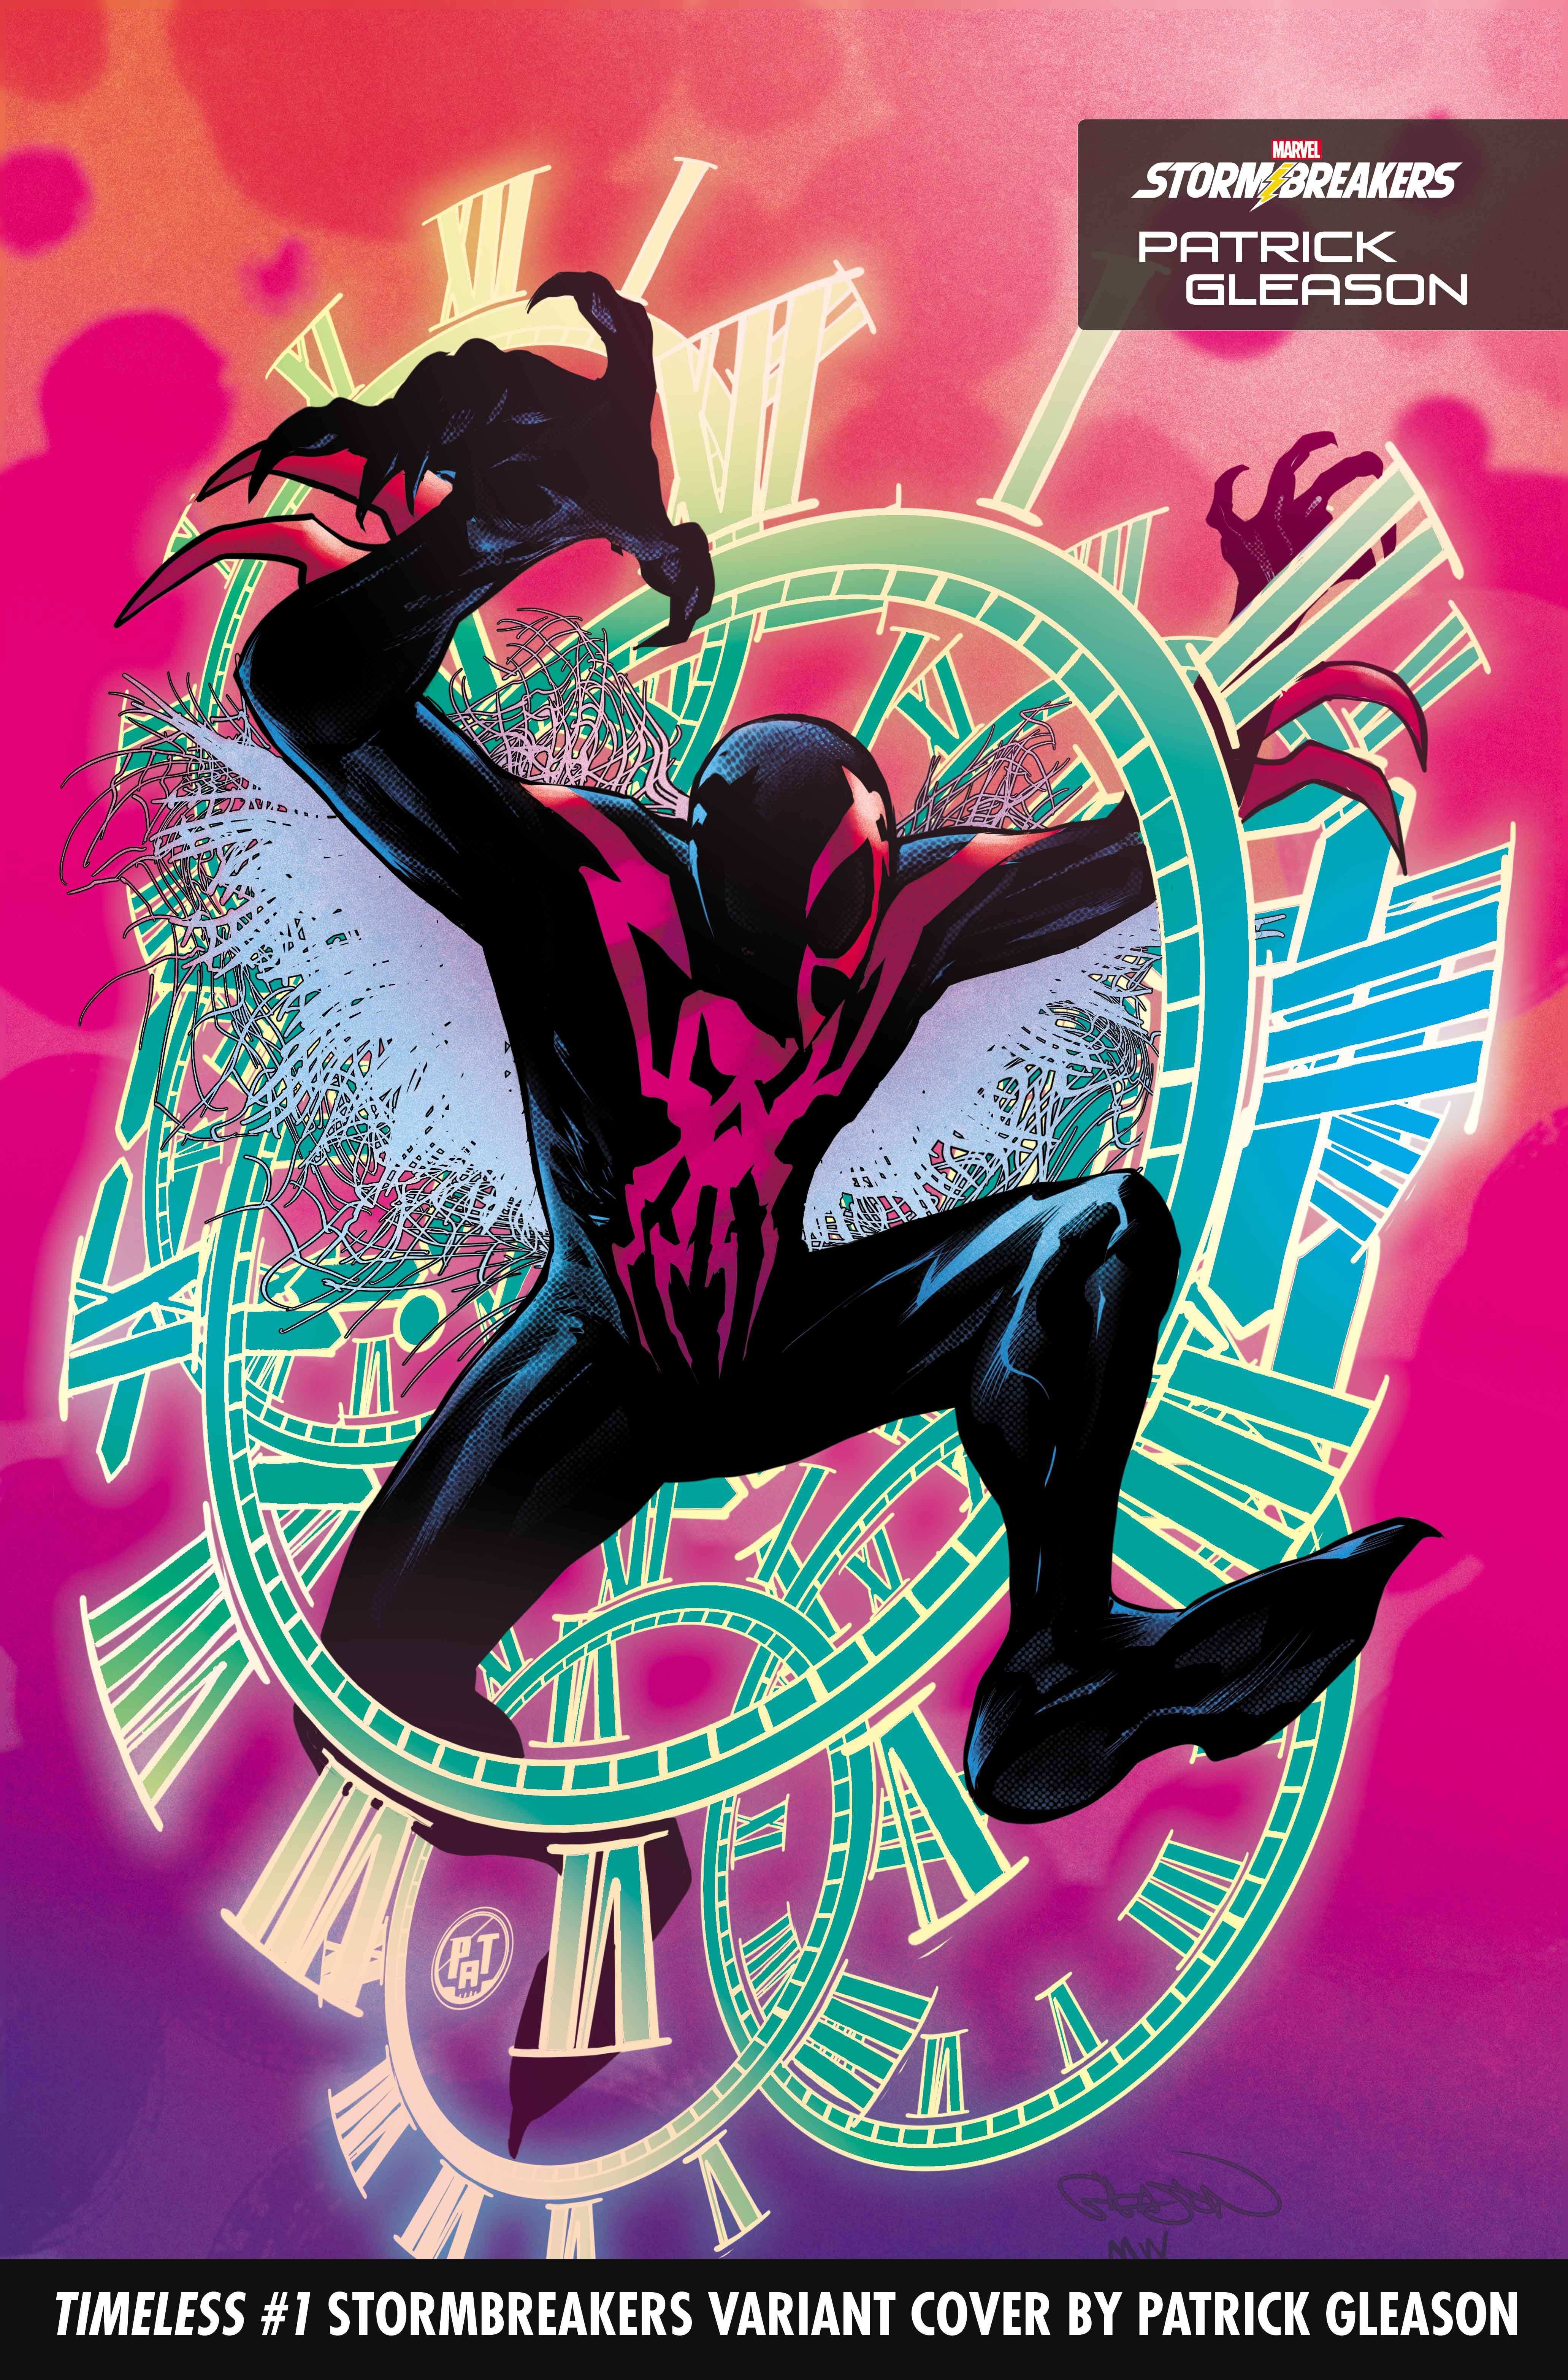 Spider-Man 2099 on the cover of Timeless 1 Stormbreakers variant by Patrick Gleason